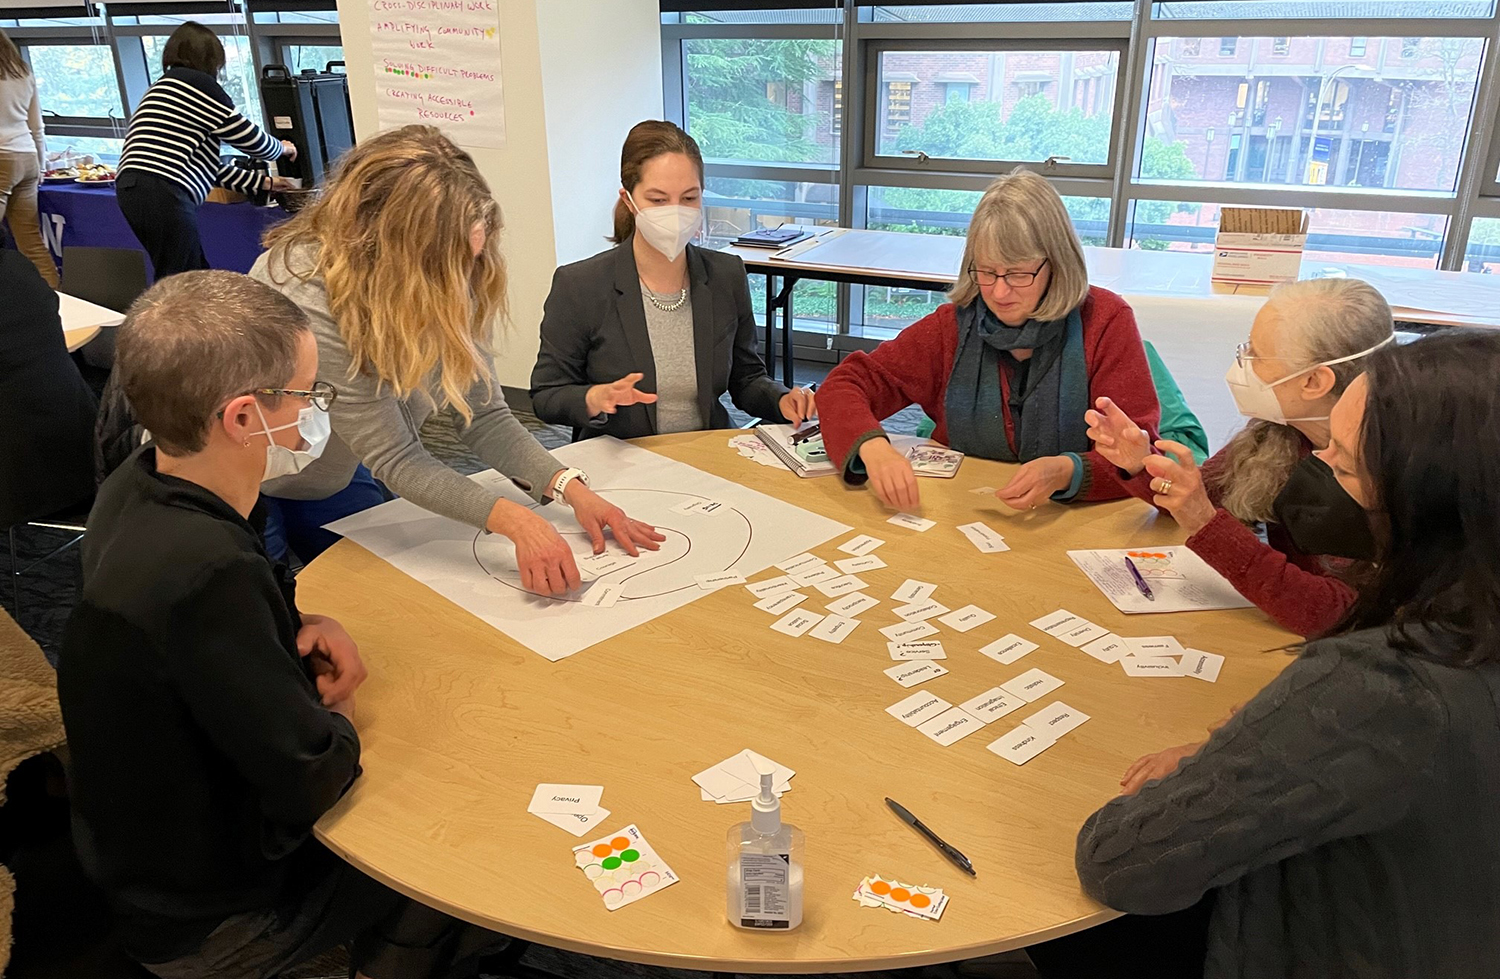 Faculty participate in a thematic card exercise around a table with the Humetrics team.